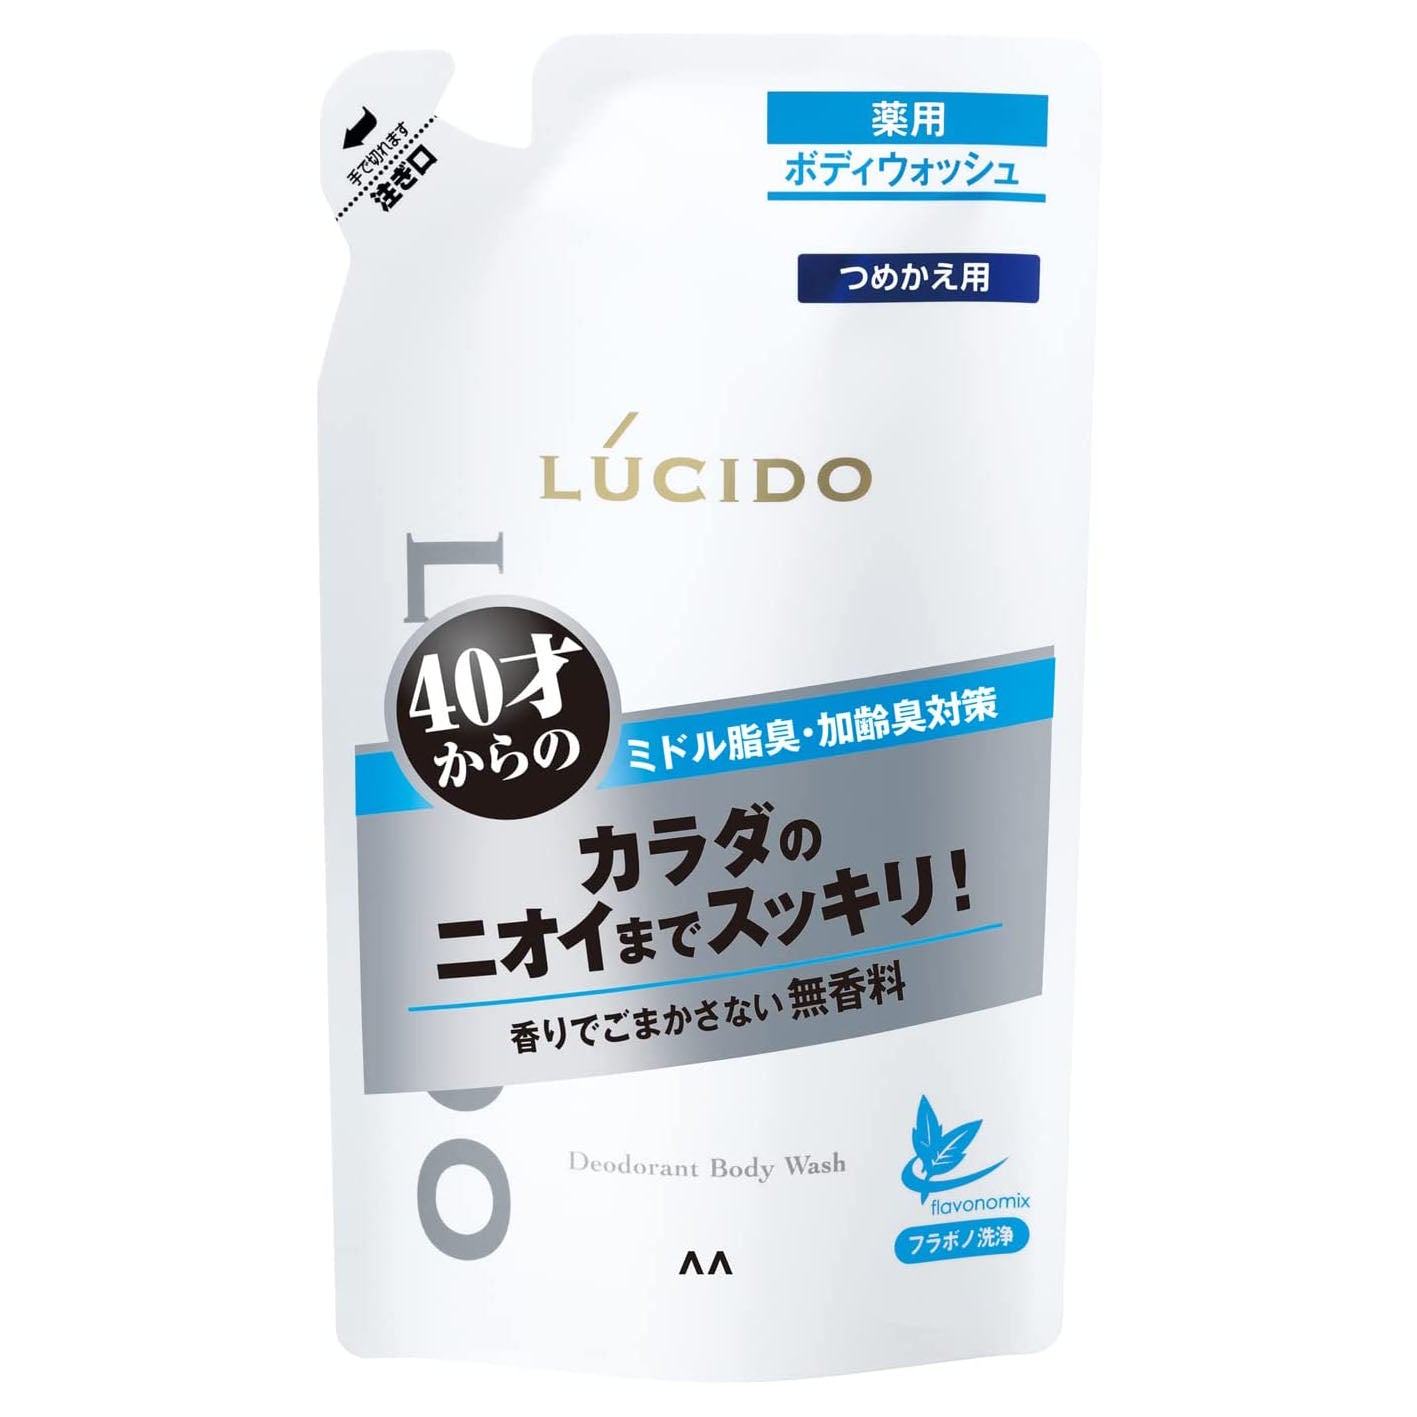 Lucido Medicated Deodorant Body Wash 380ml - Refill - Harajuku Culture Japan - Japanease Products Store Beauty and Stationery